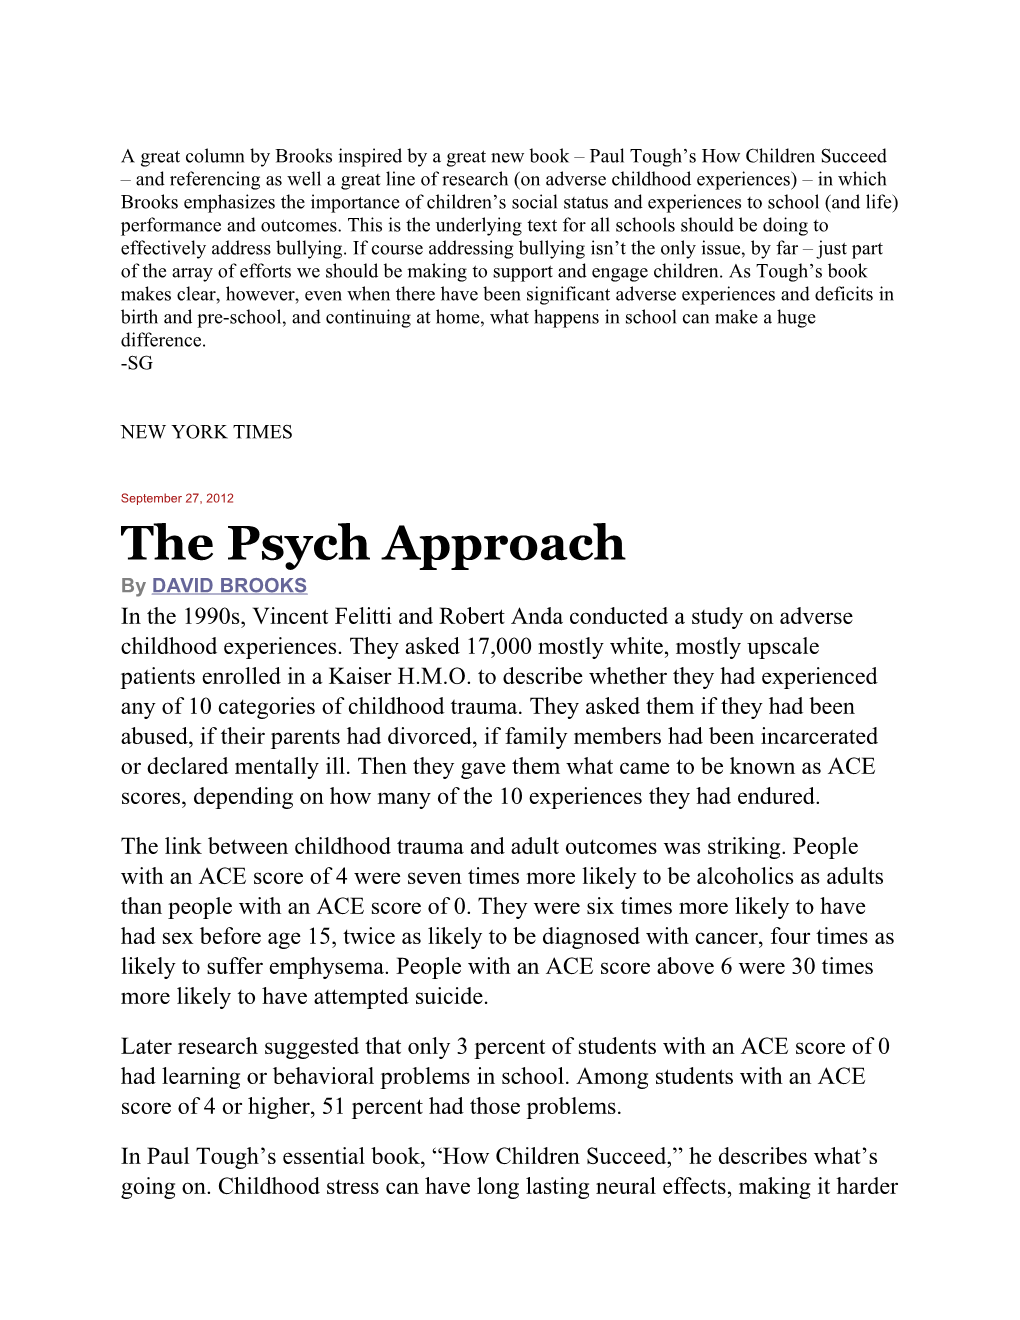 The Psych Approach